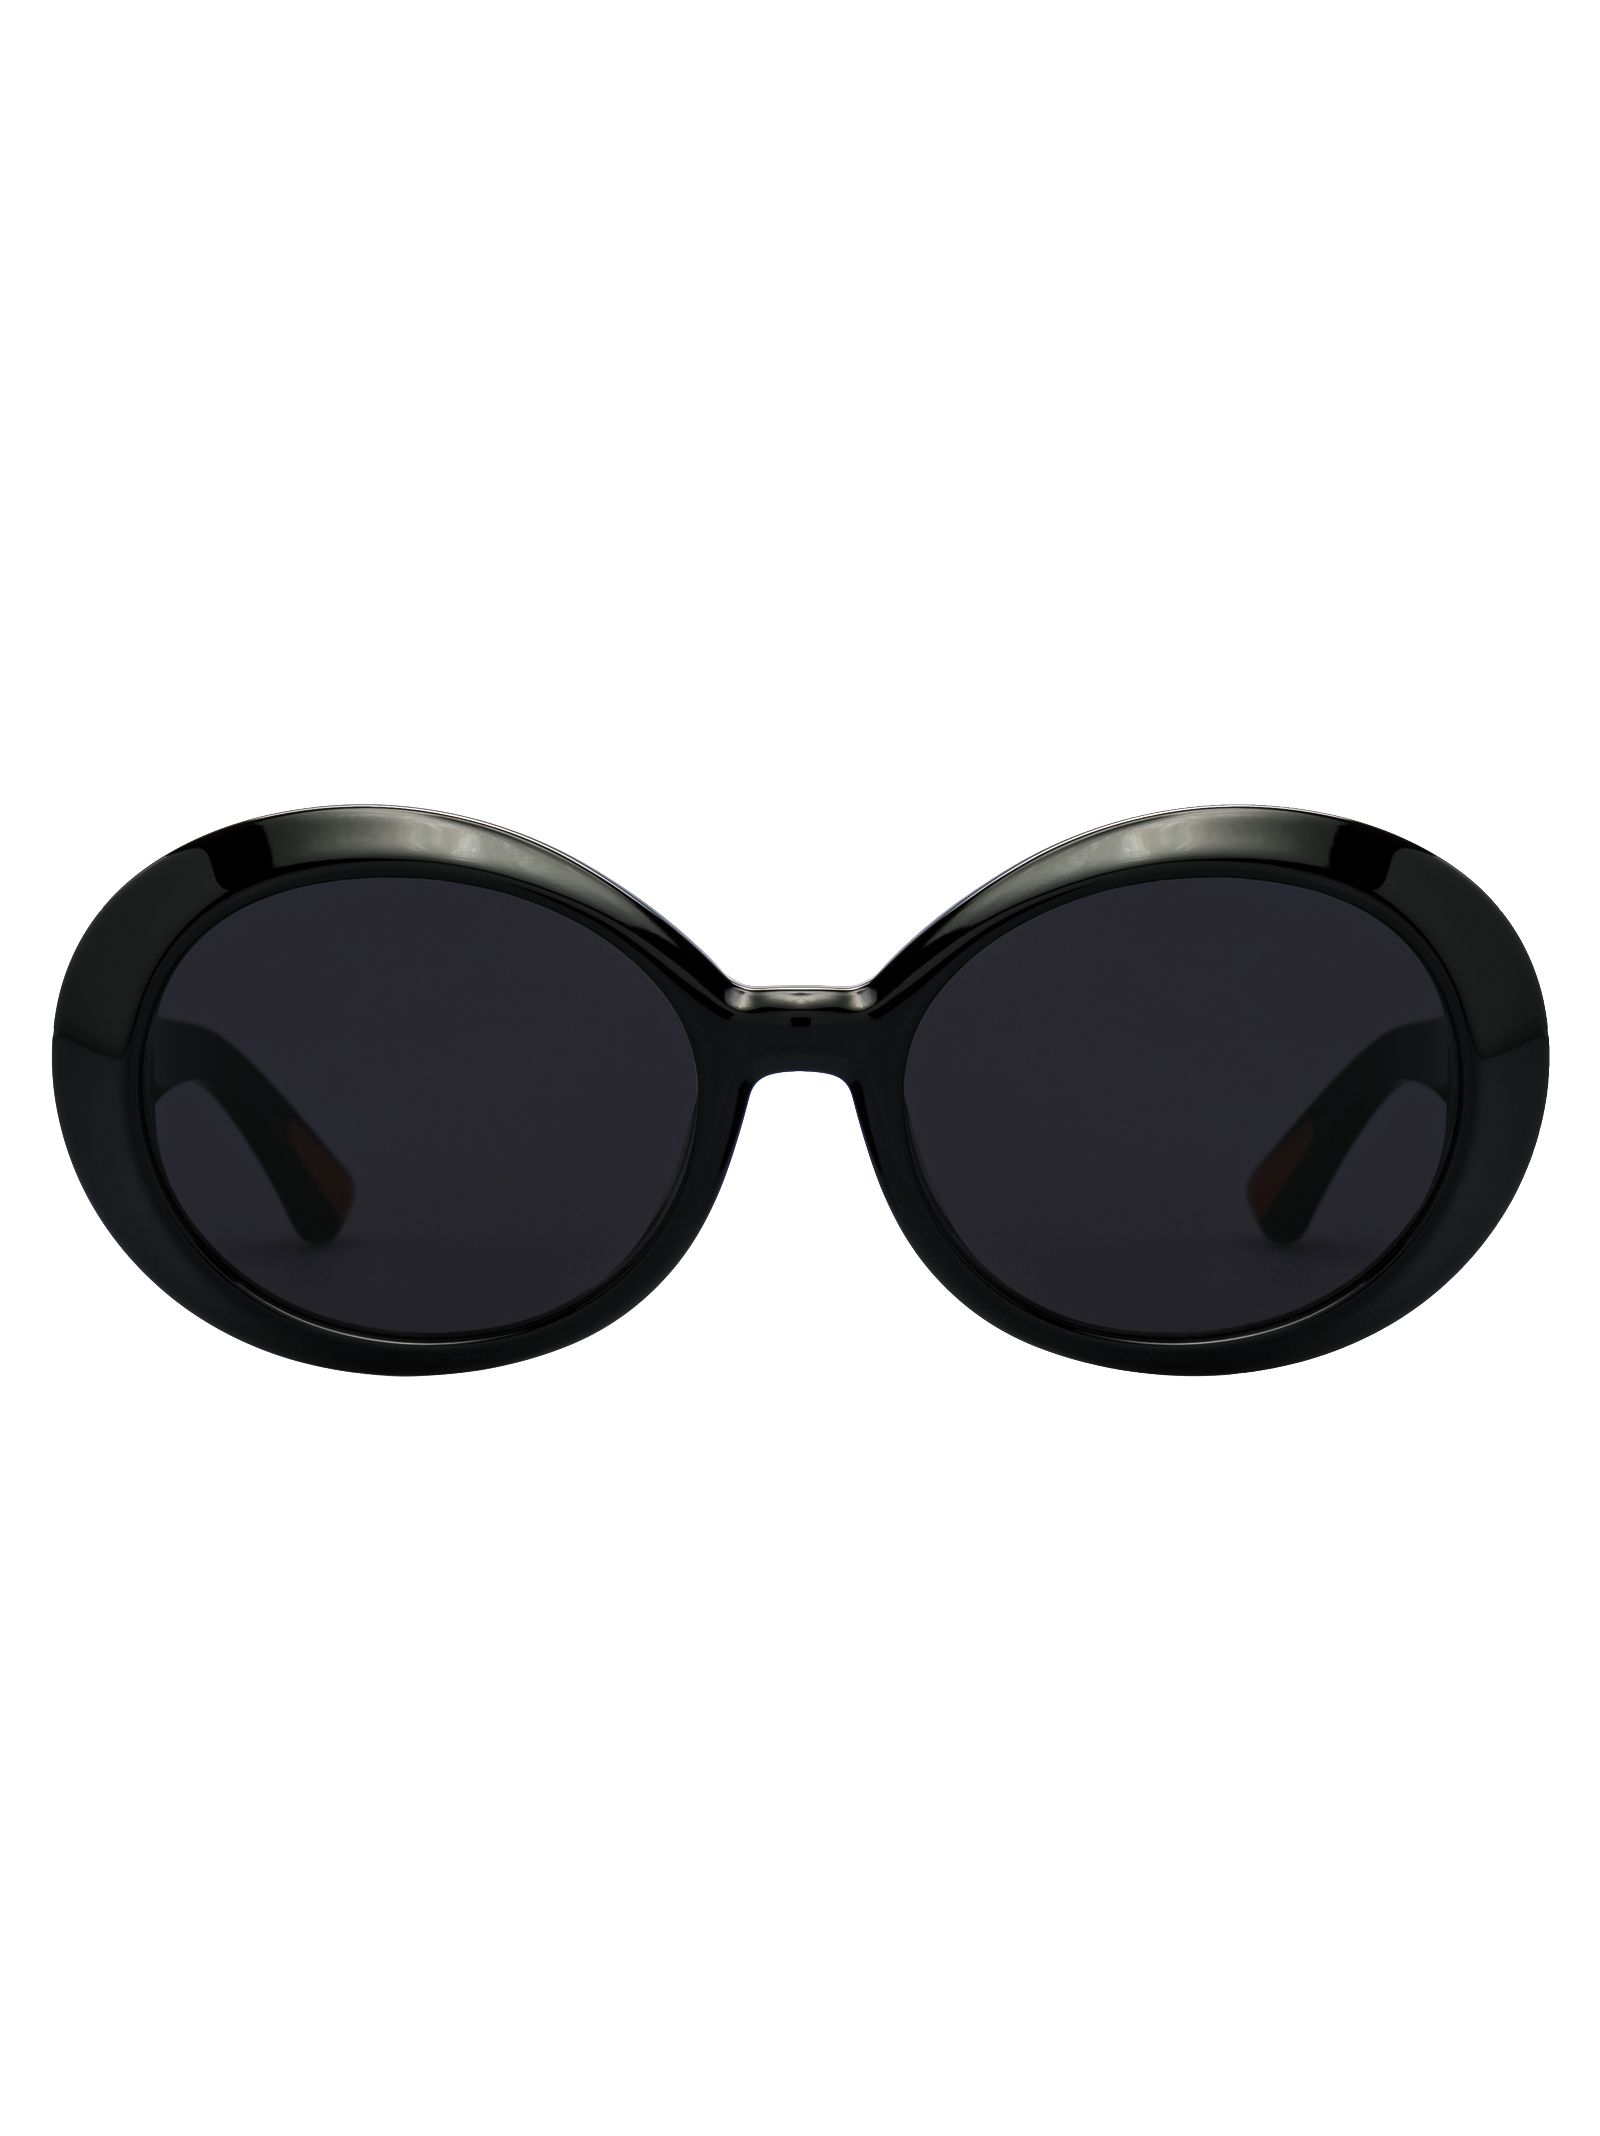 CHRISTIAN ROTH ARCHIVE 1993 SUNGLASSES,10613019